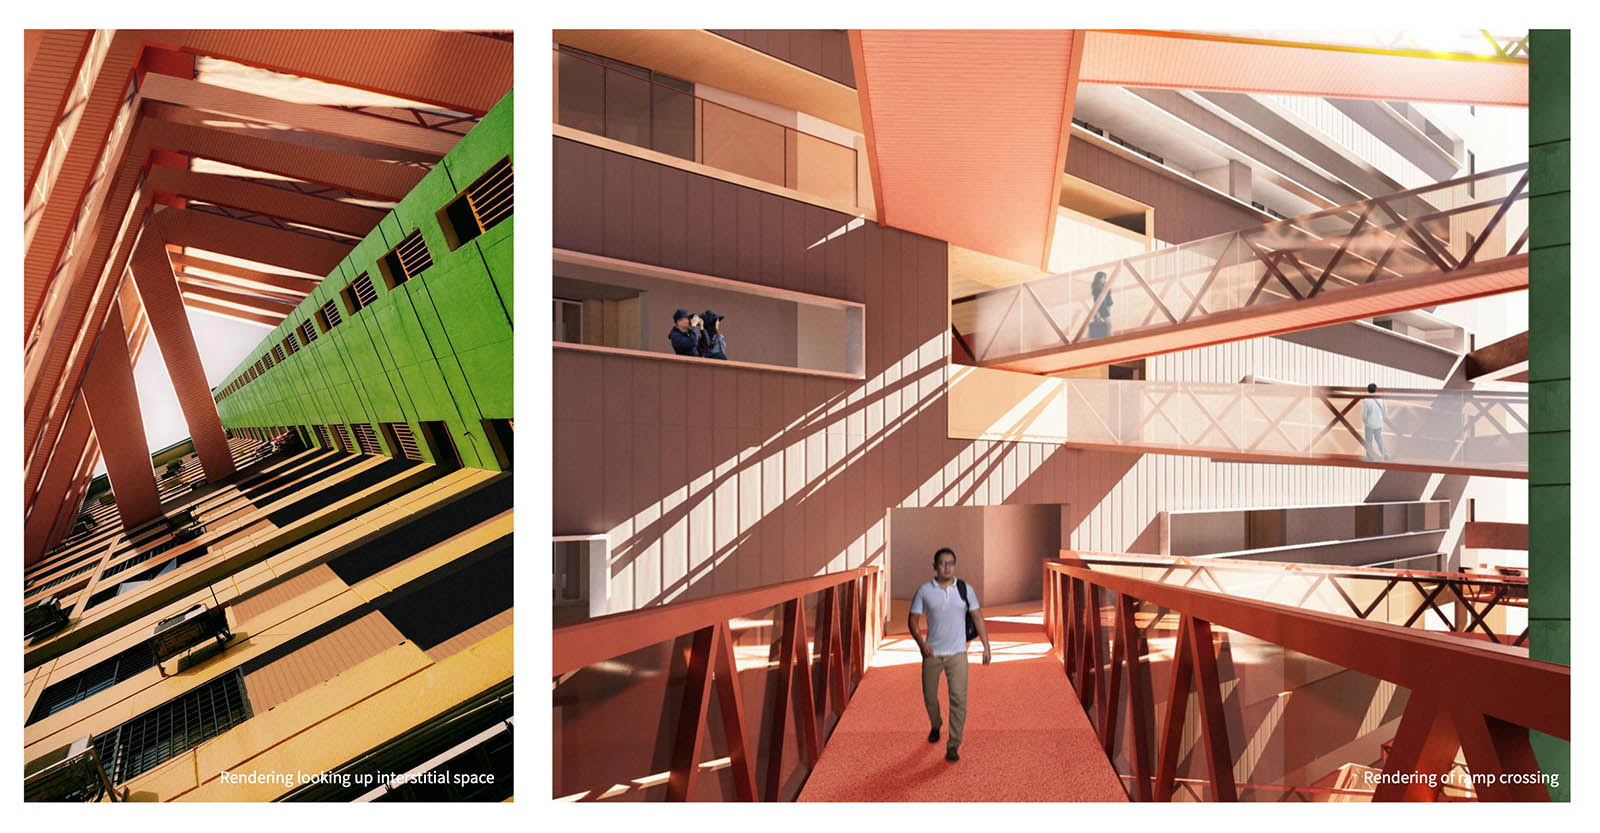 Composite of two images one looking up interstitial space and the other is a rendering of ramp crossing